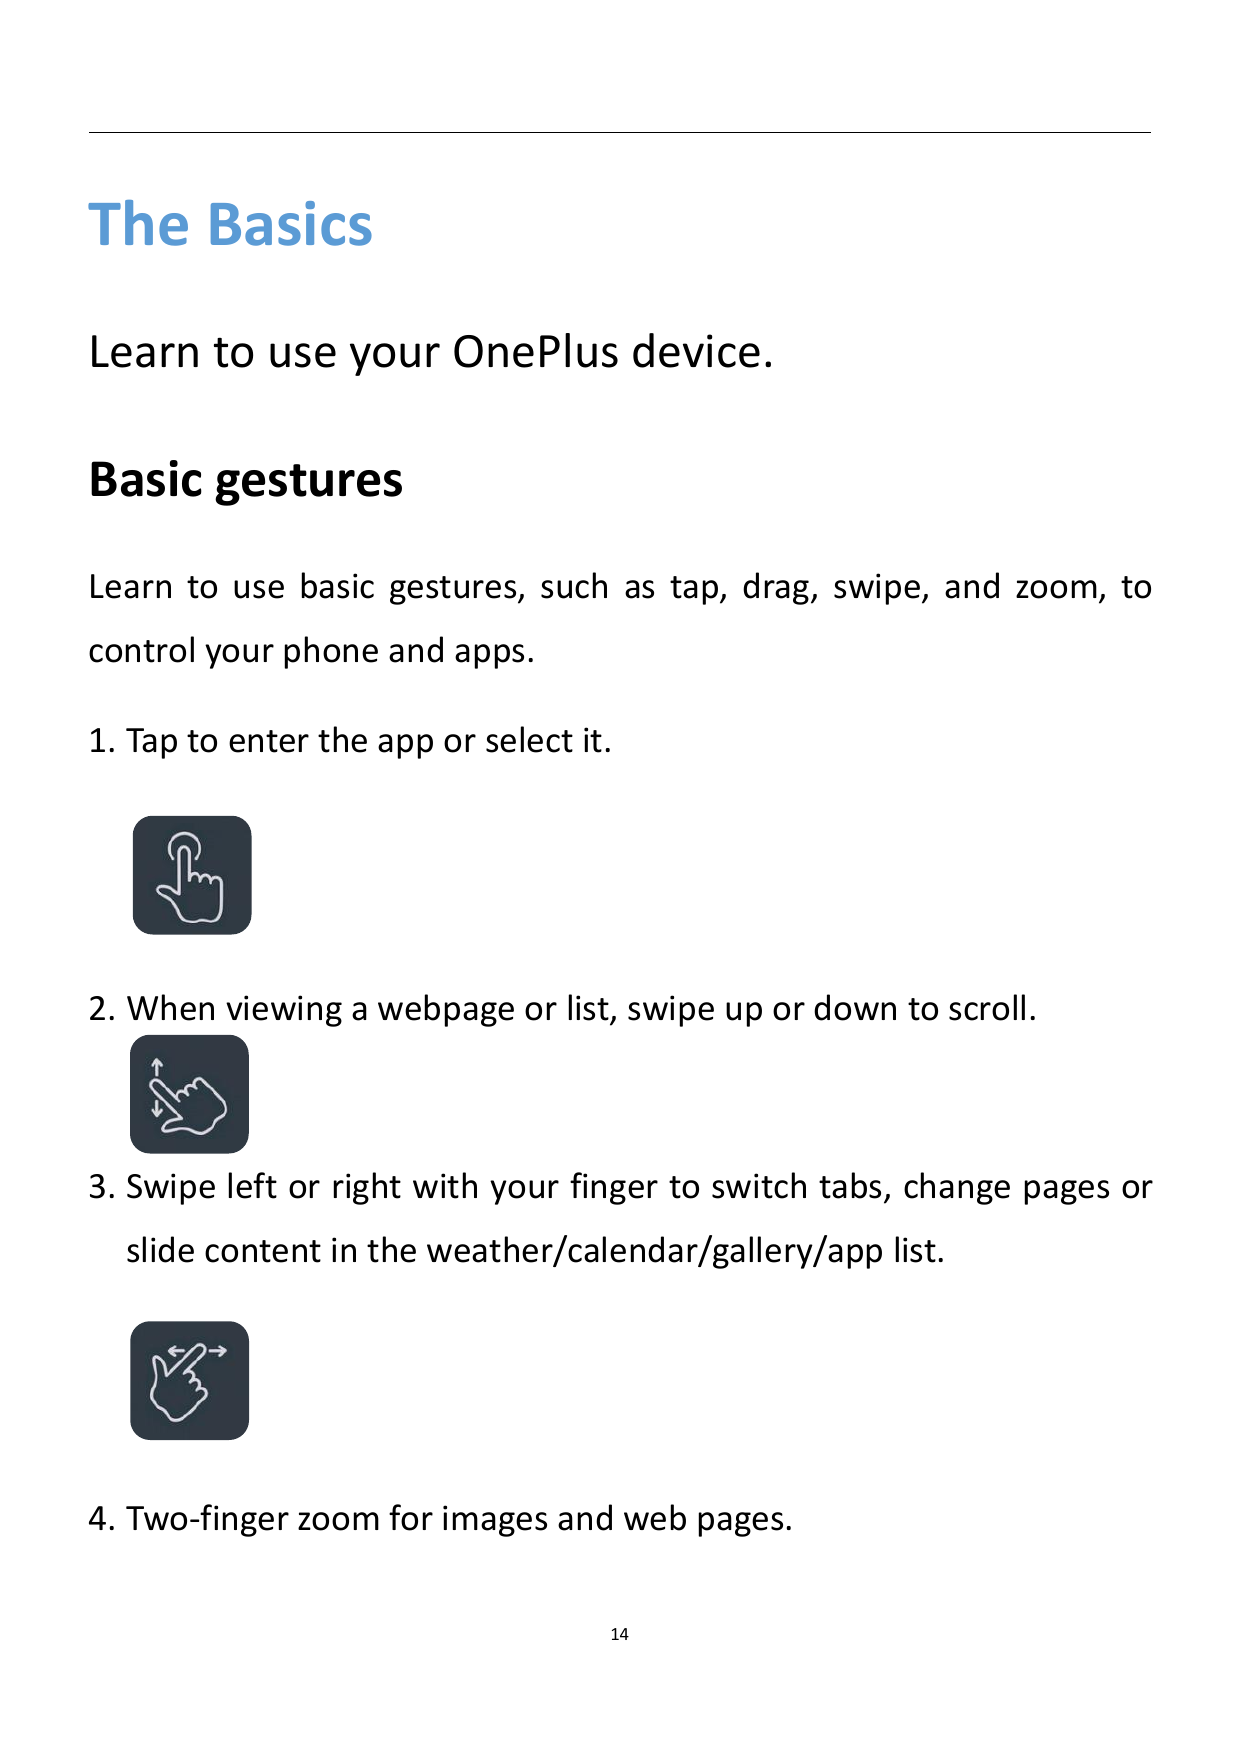 The BasicsLearn to use your OnePlus device.Basic gesturesLearn to use basic gestures, such as tap, drag, swipe, and zoom, tocont